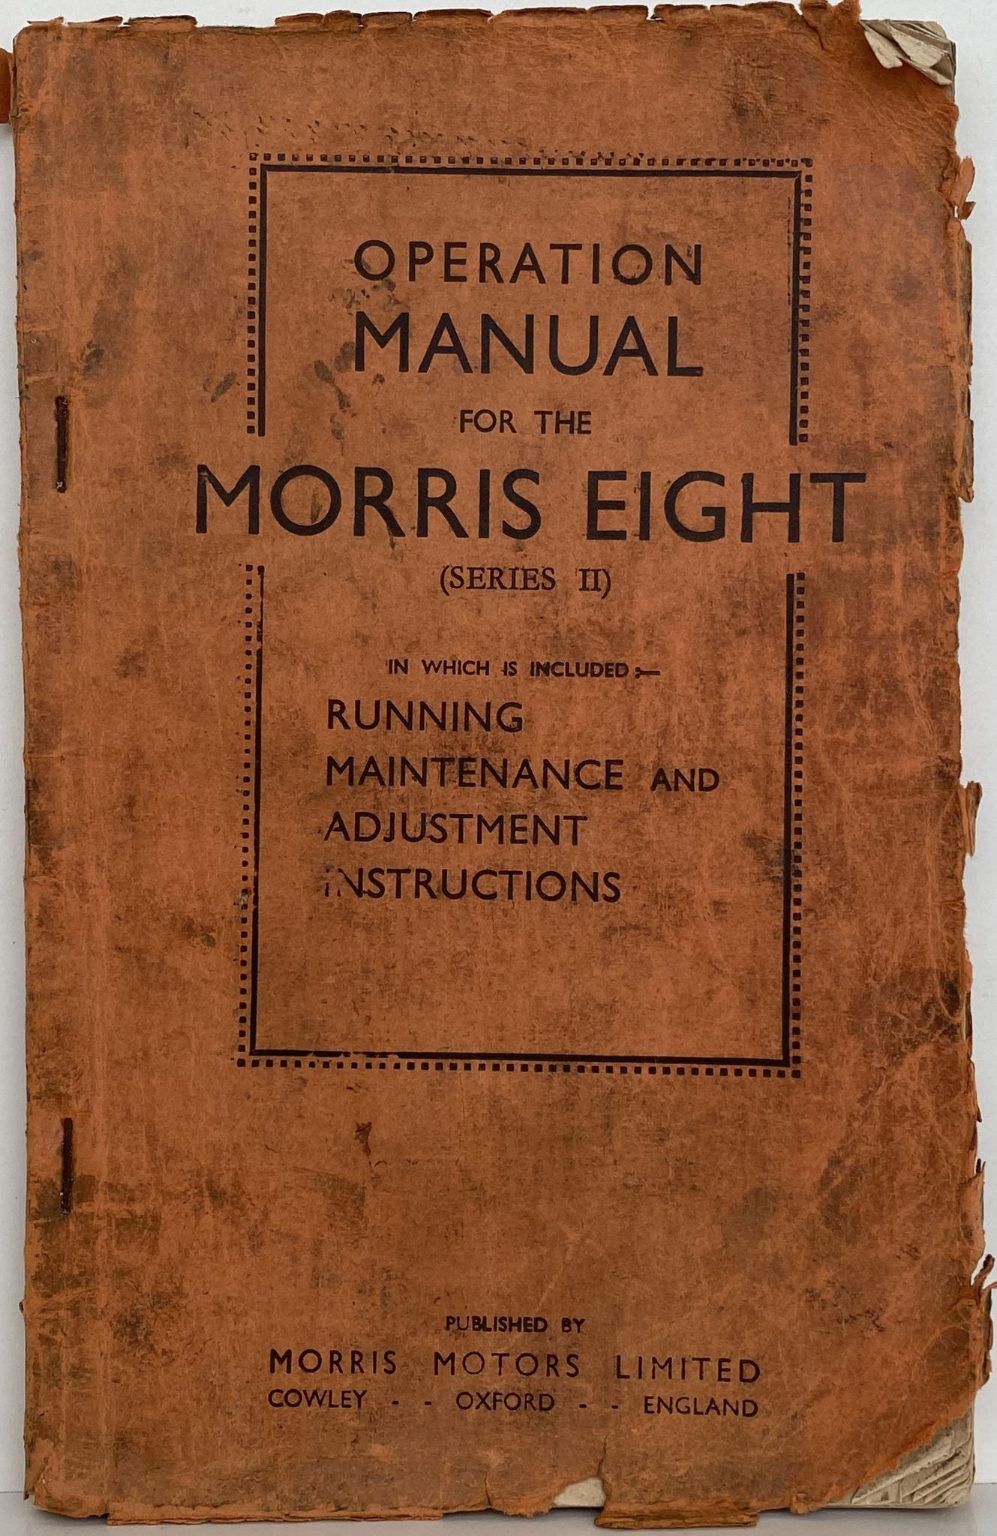 OPERATION MANUAL for the MORRIS EIGHT (SERIES II)